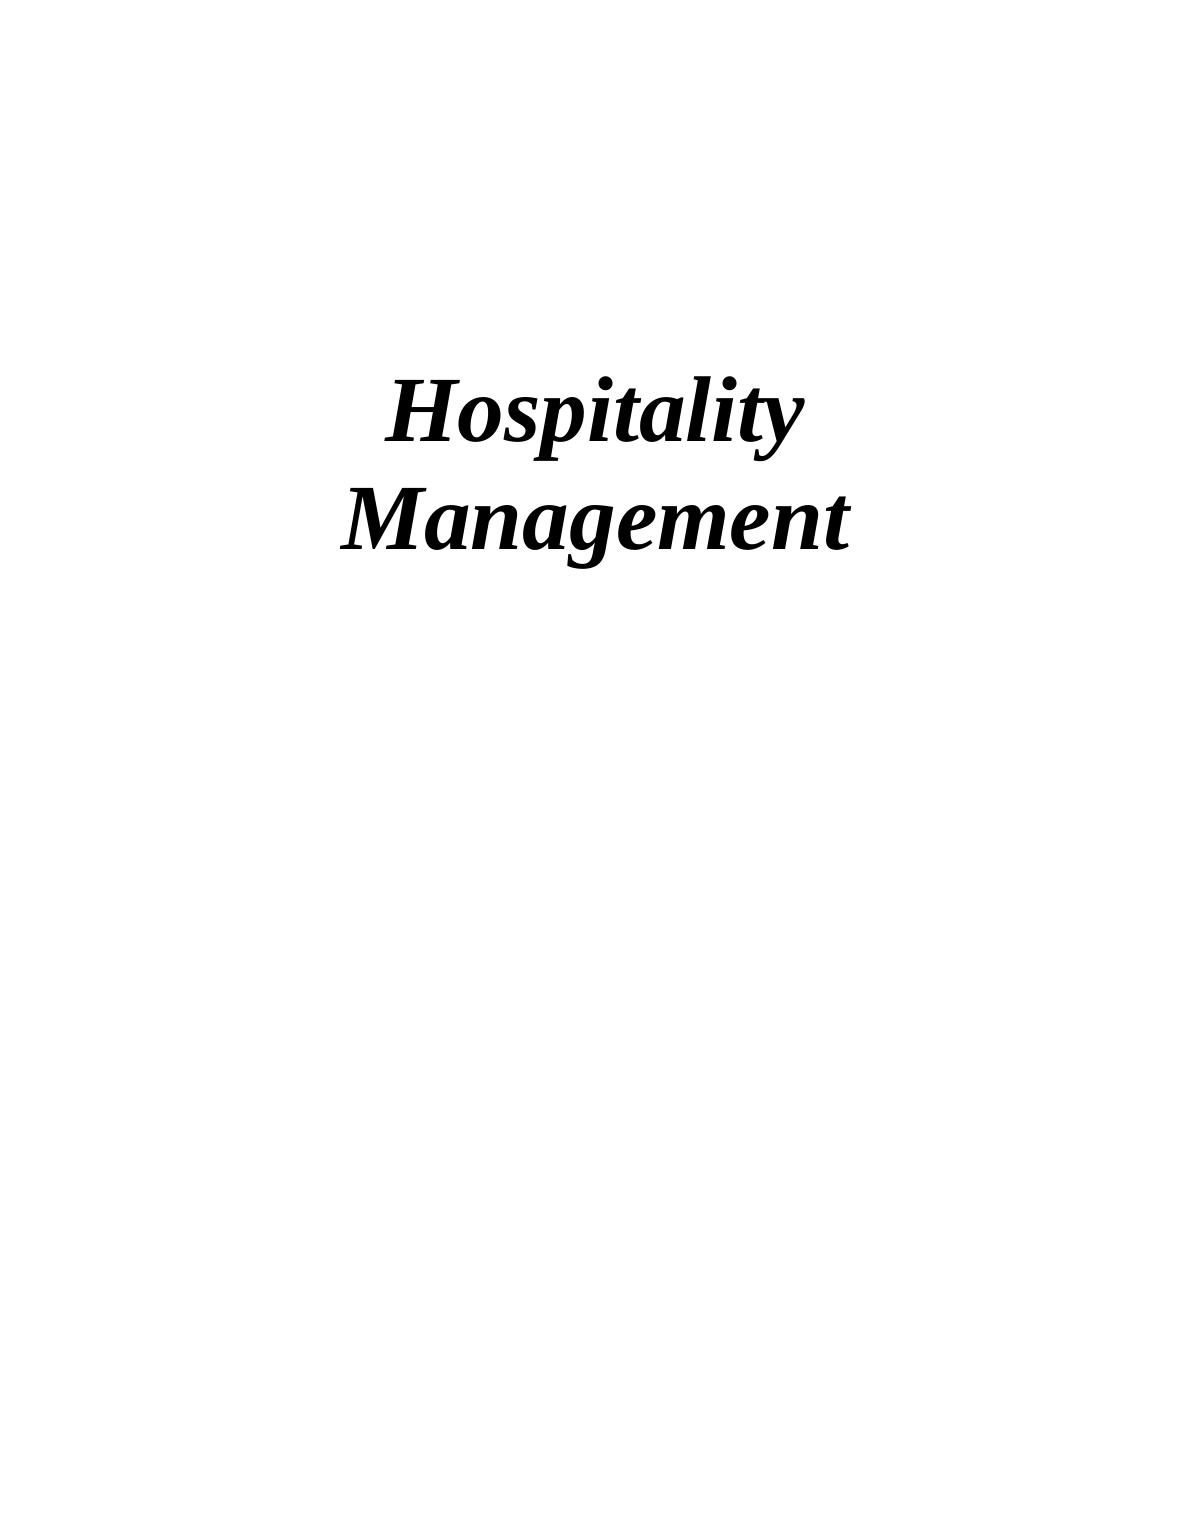 Growth of Aviation Industry in Hospitality Management_1